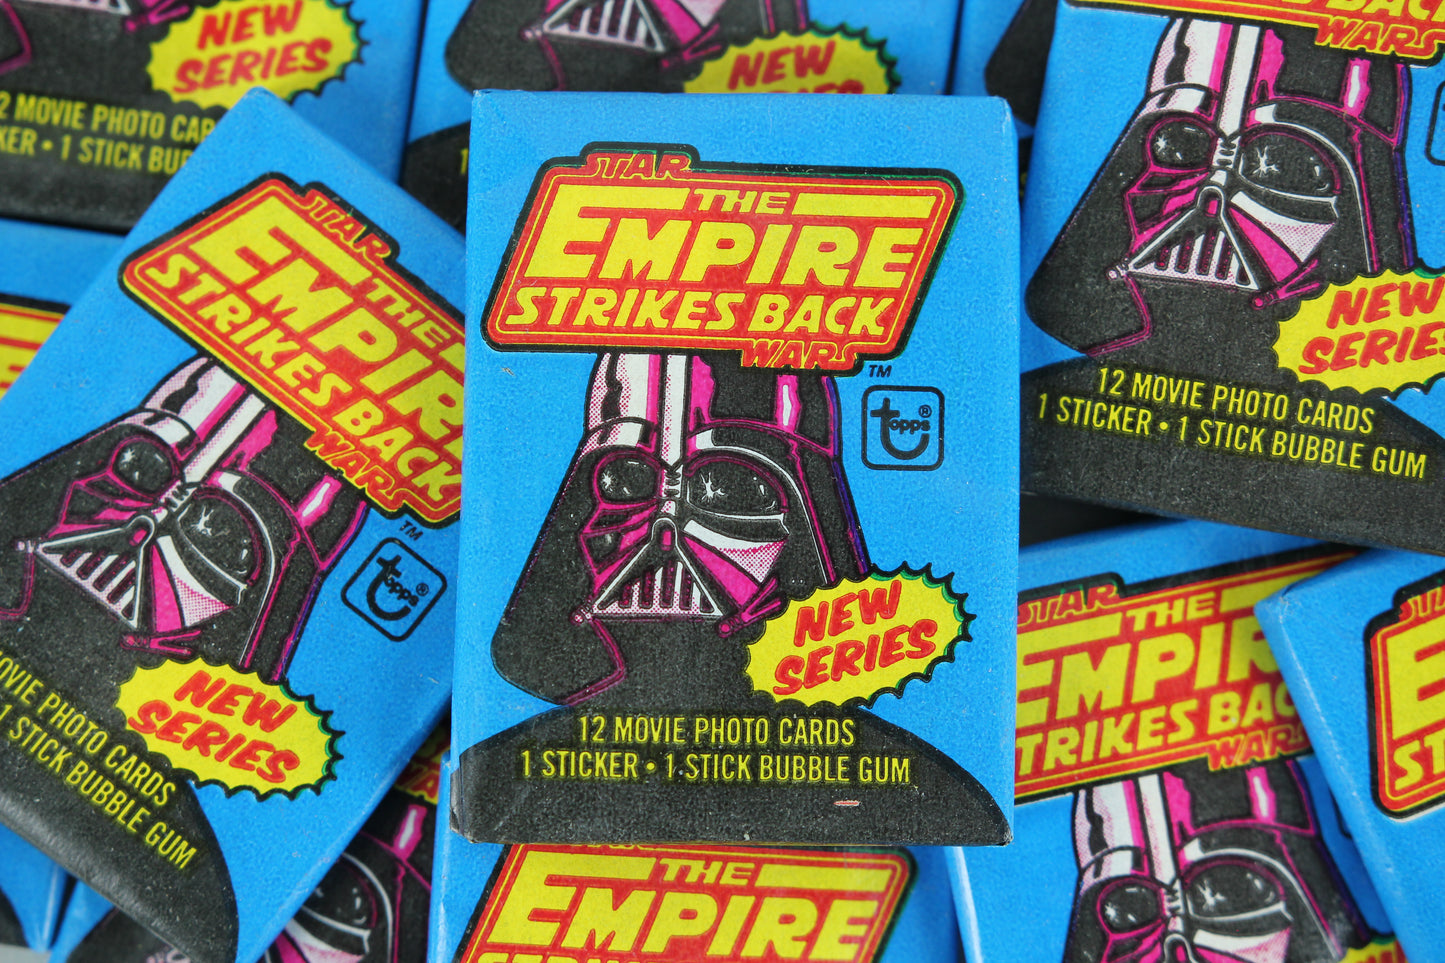 Topps Star Wars The Empire Strikes Back Series 2 Collectible Trading Cards, One Wax Pack, 1980